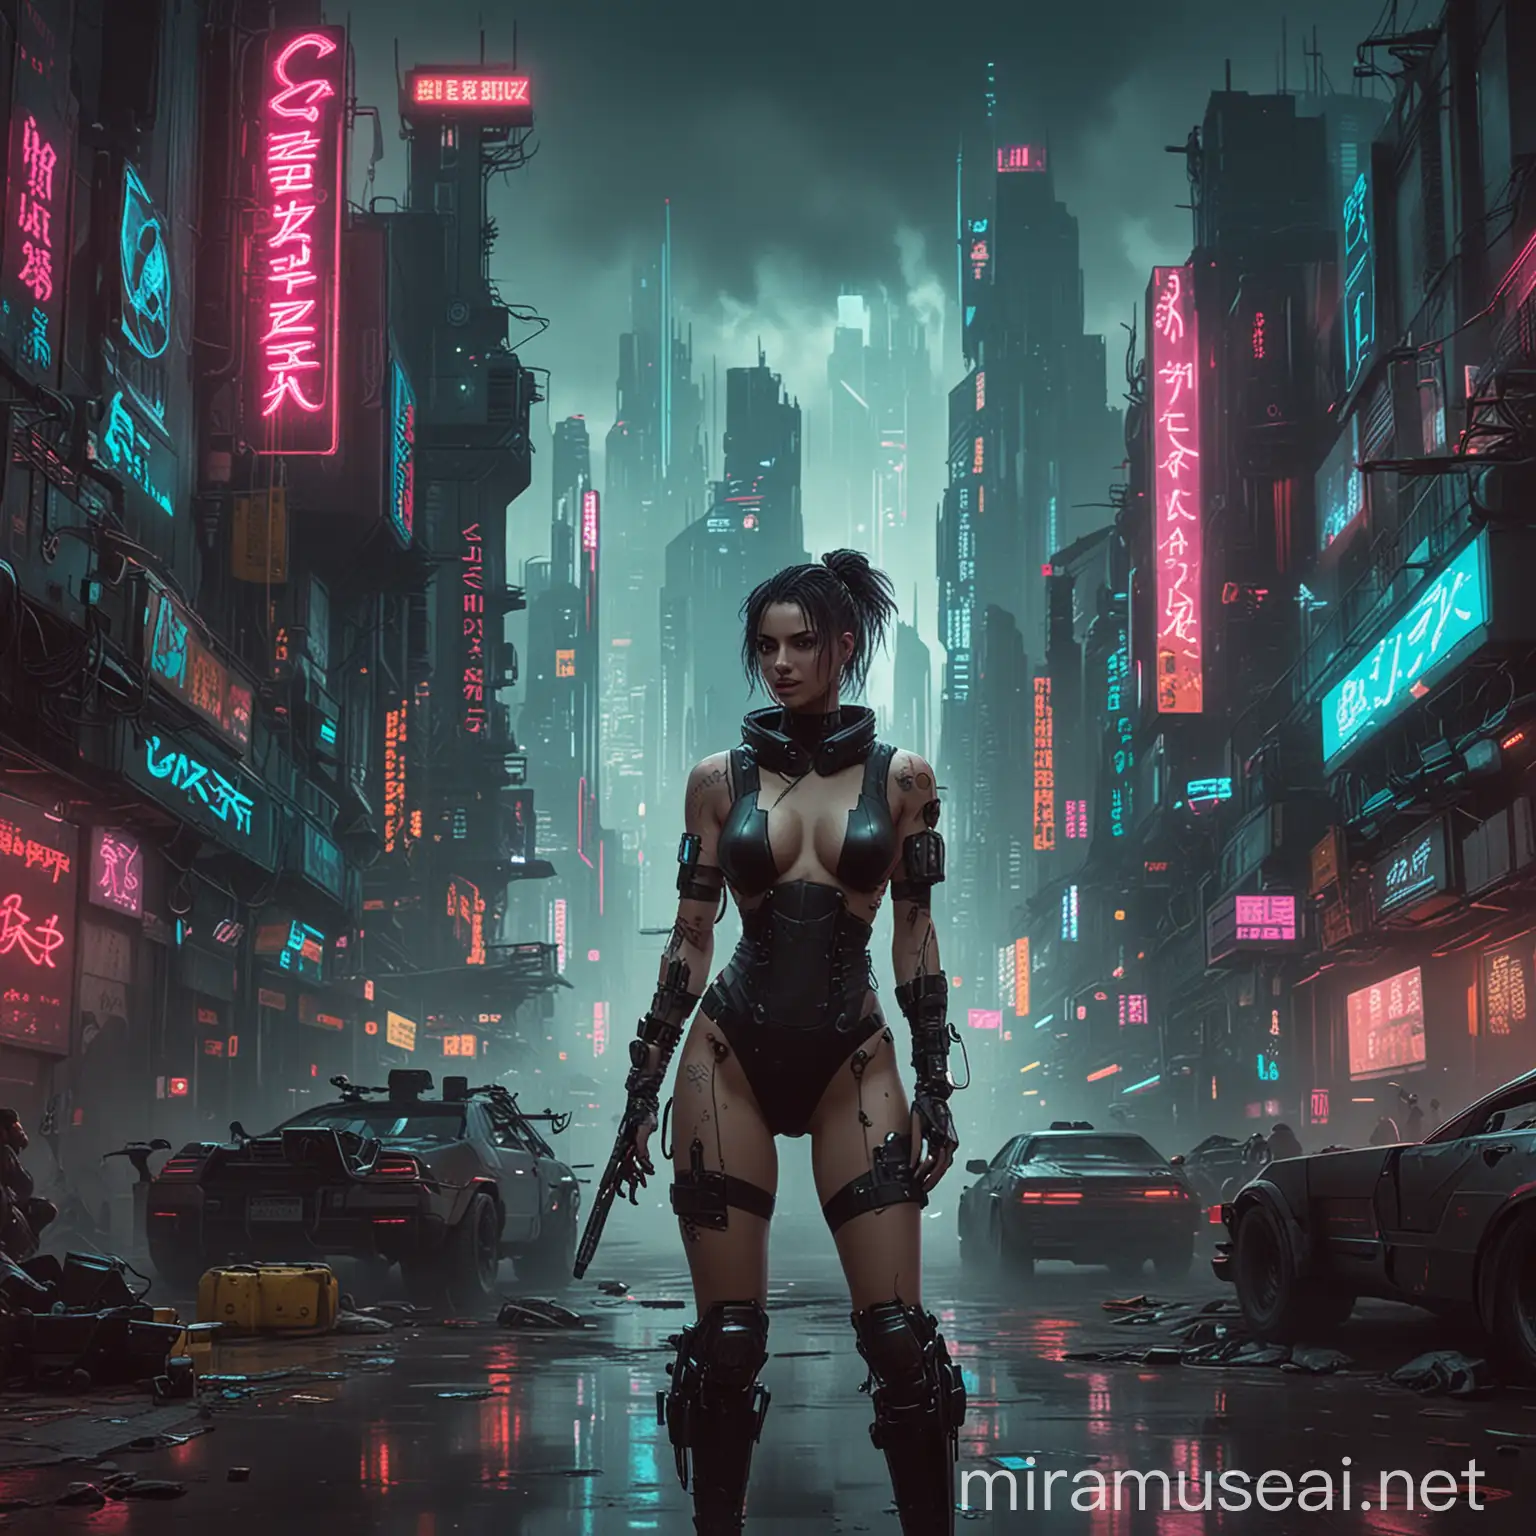 Futuristic Cyberpunk Cityscape with Neon Lights and Hovering Vehicles